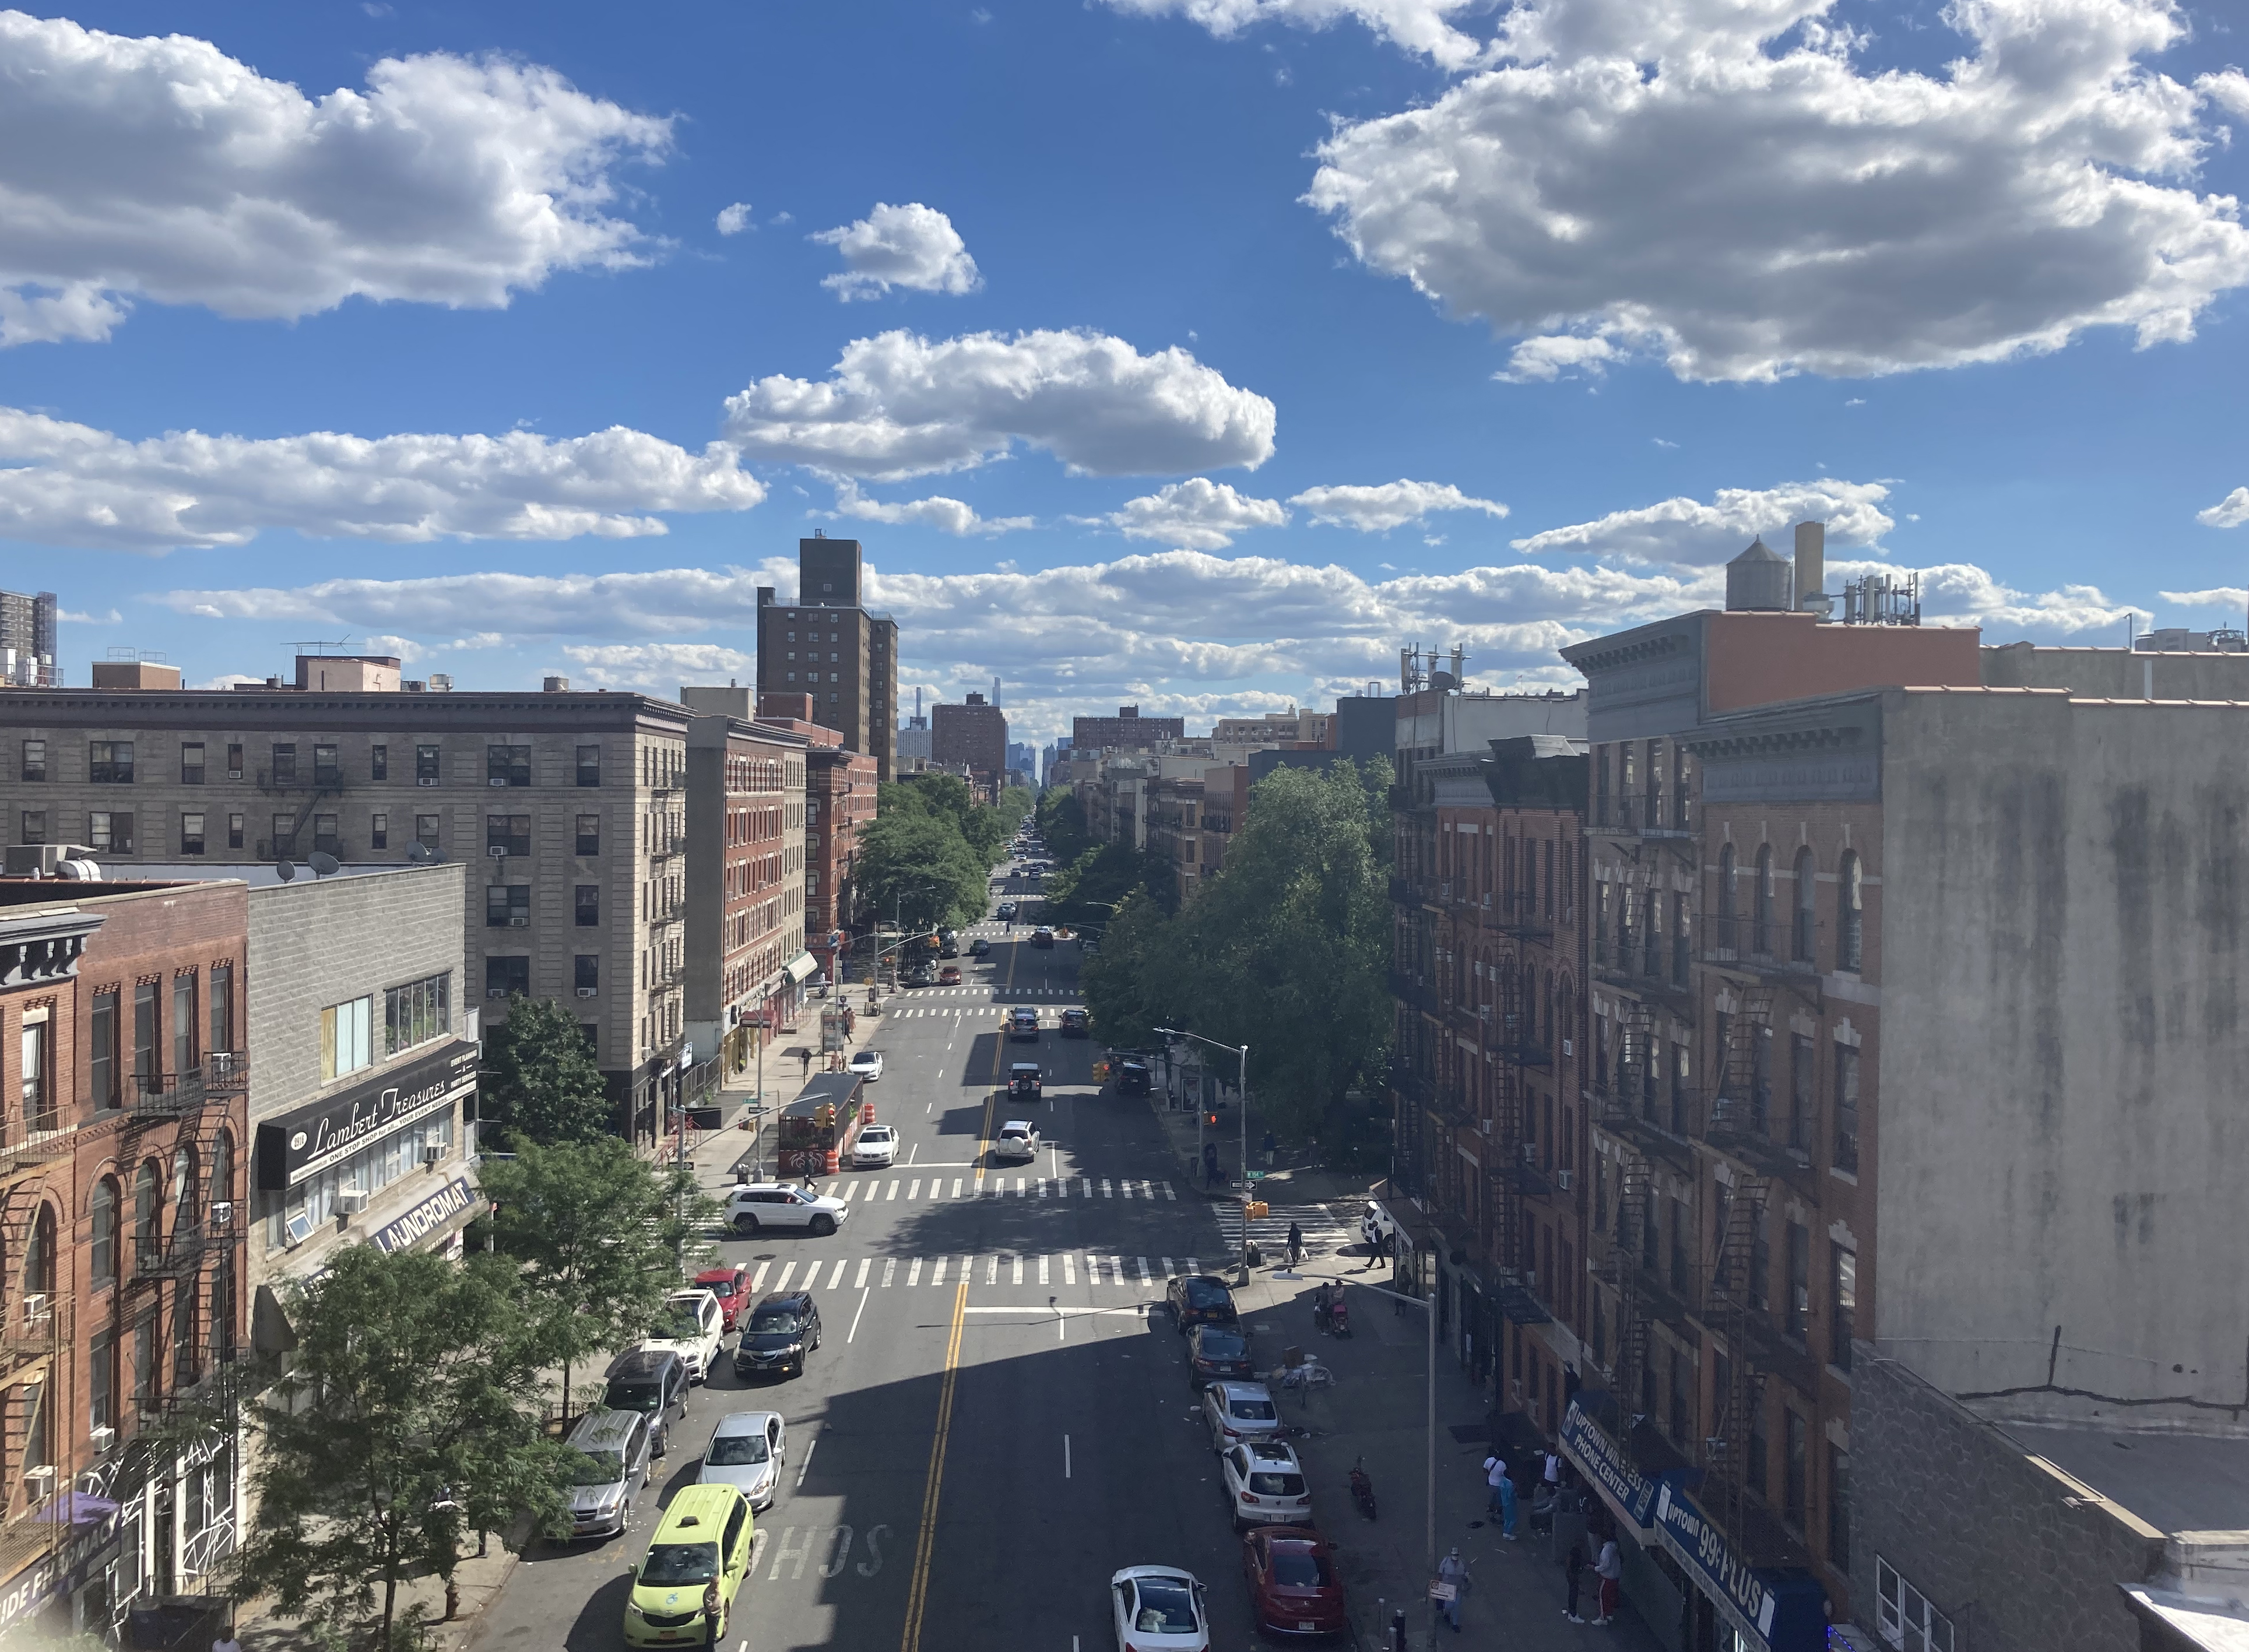 A view of Harlem.